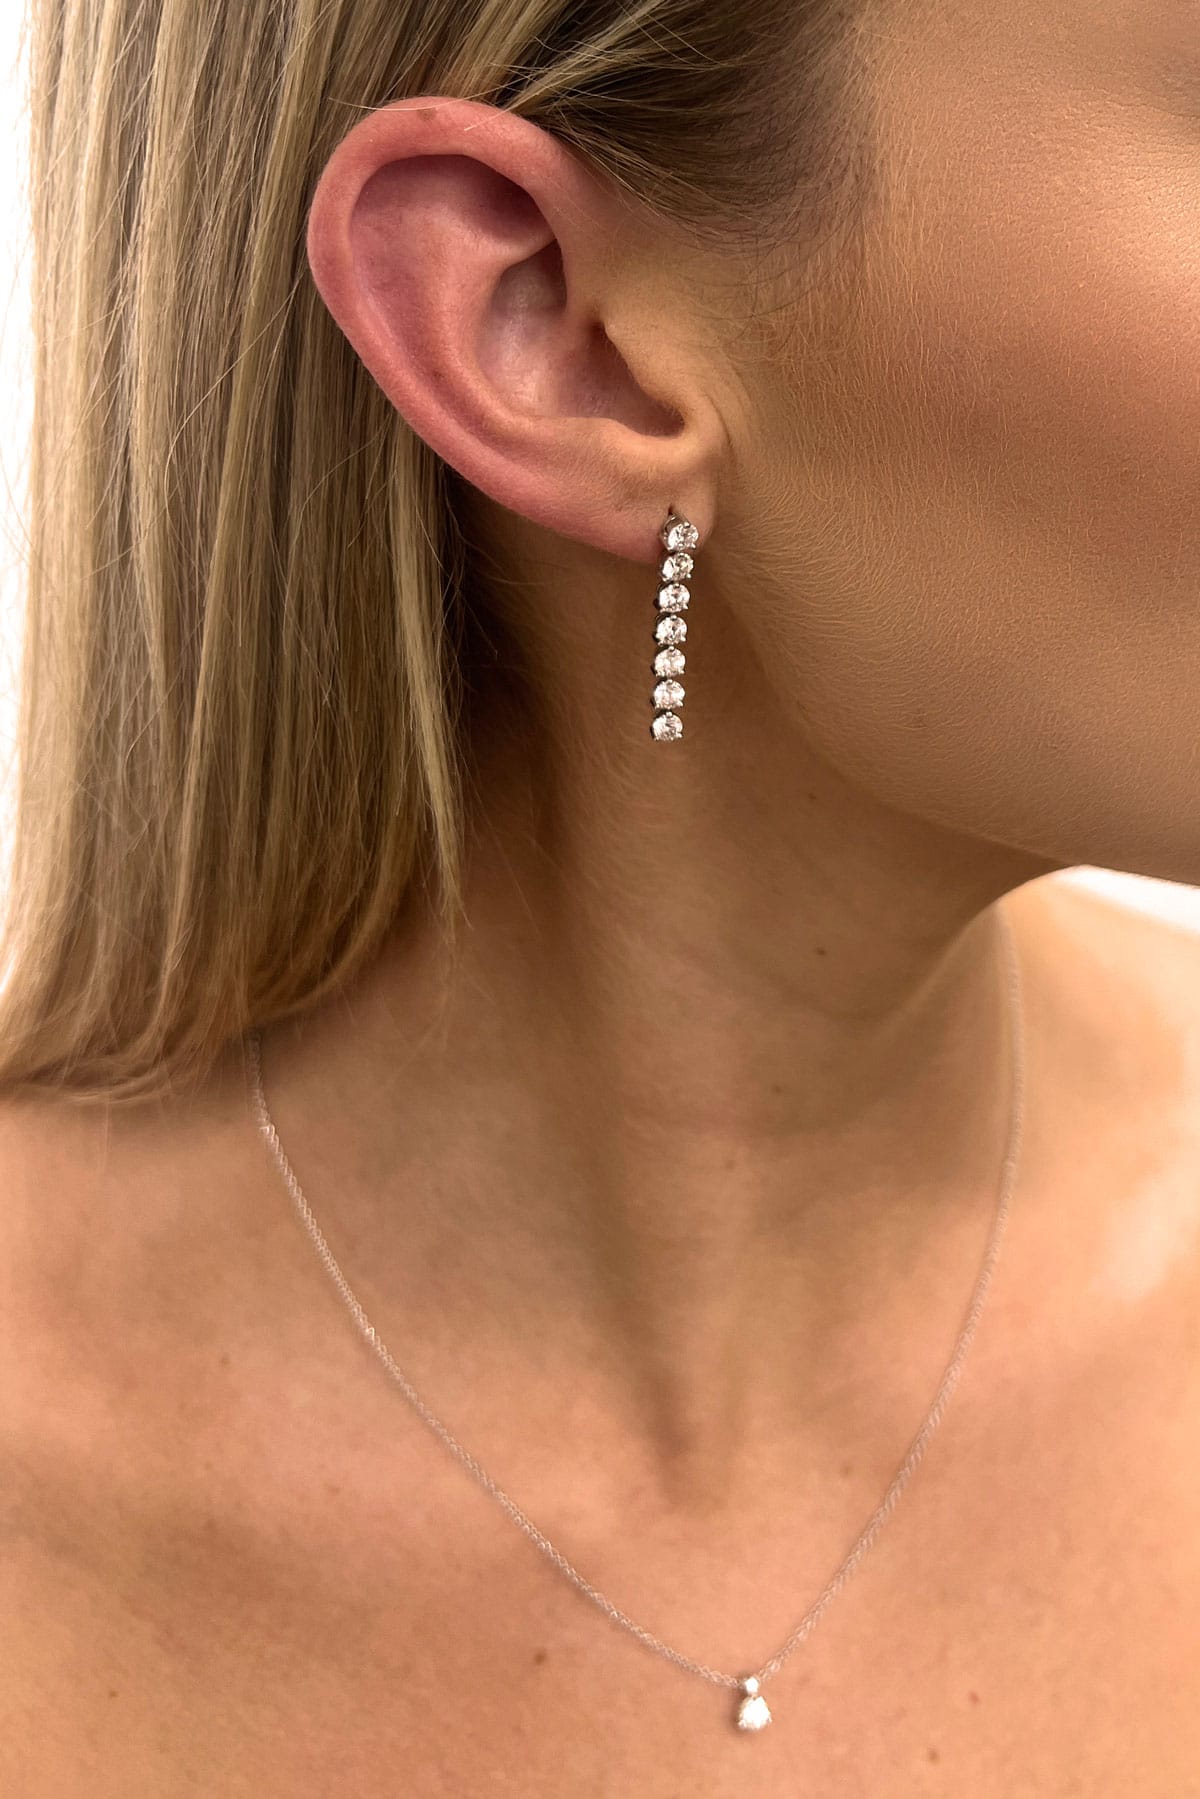 Cascade Medium Stiletto Earrings From Hearts On Fire available from LeGassick Diamonds And Jewellery, Gold Coast Australia.